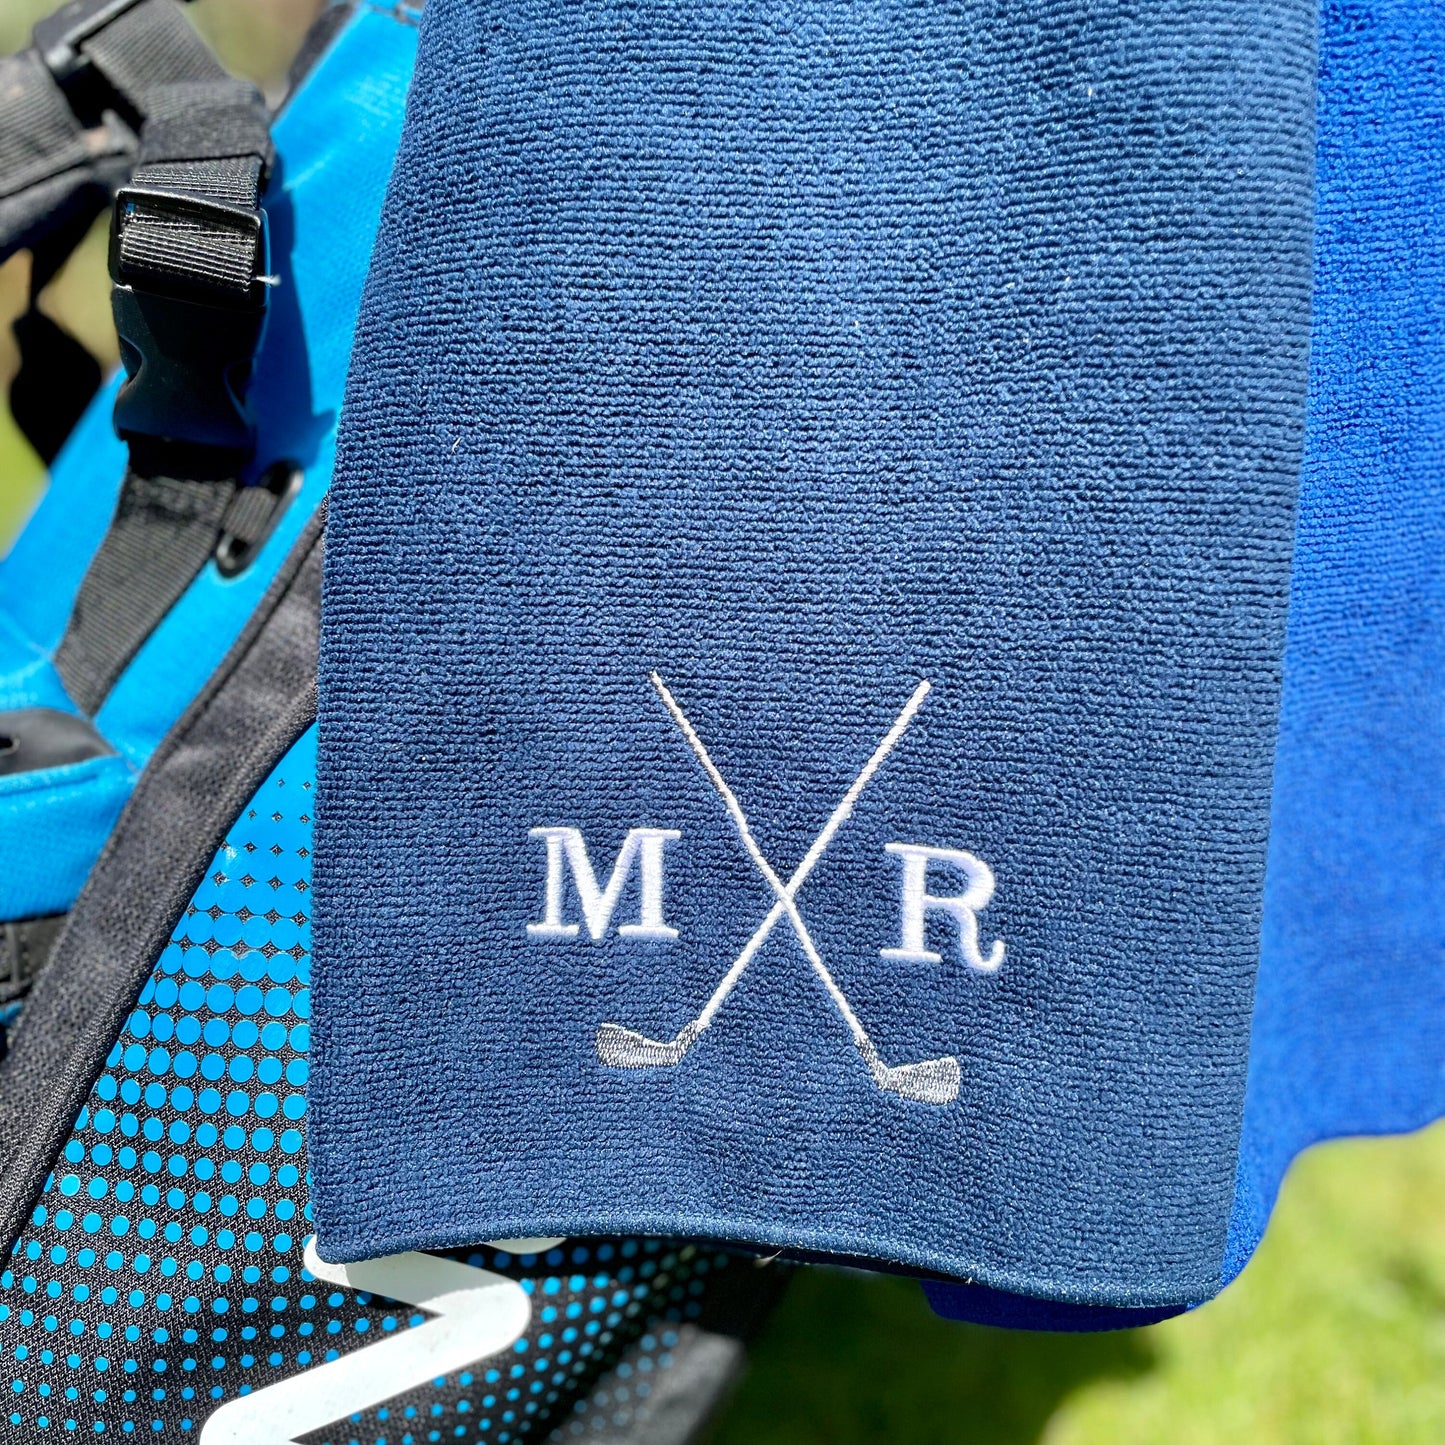 Personalised Embroidered Golf Towel